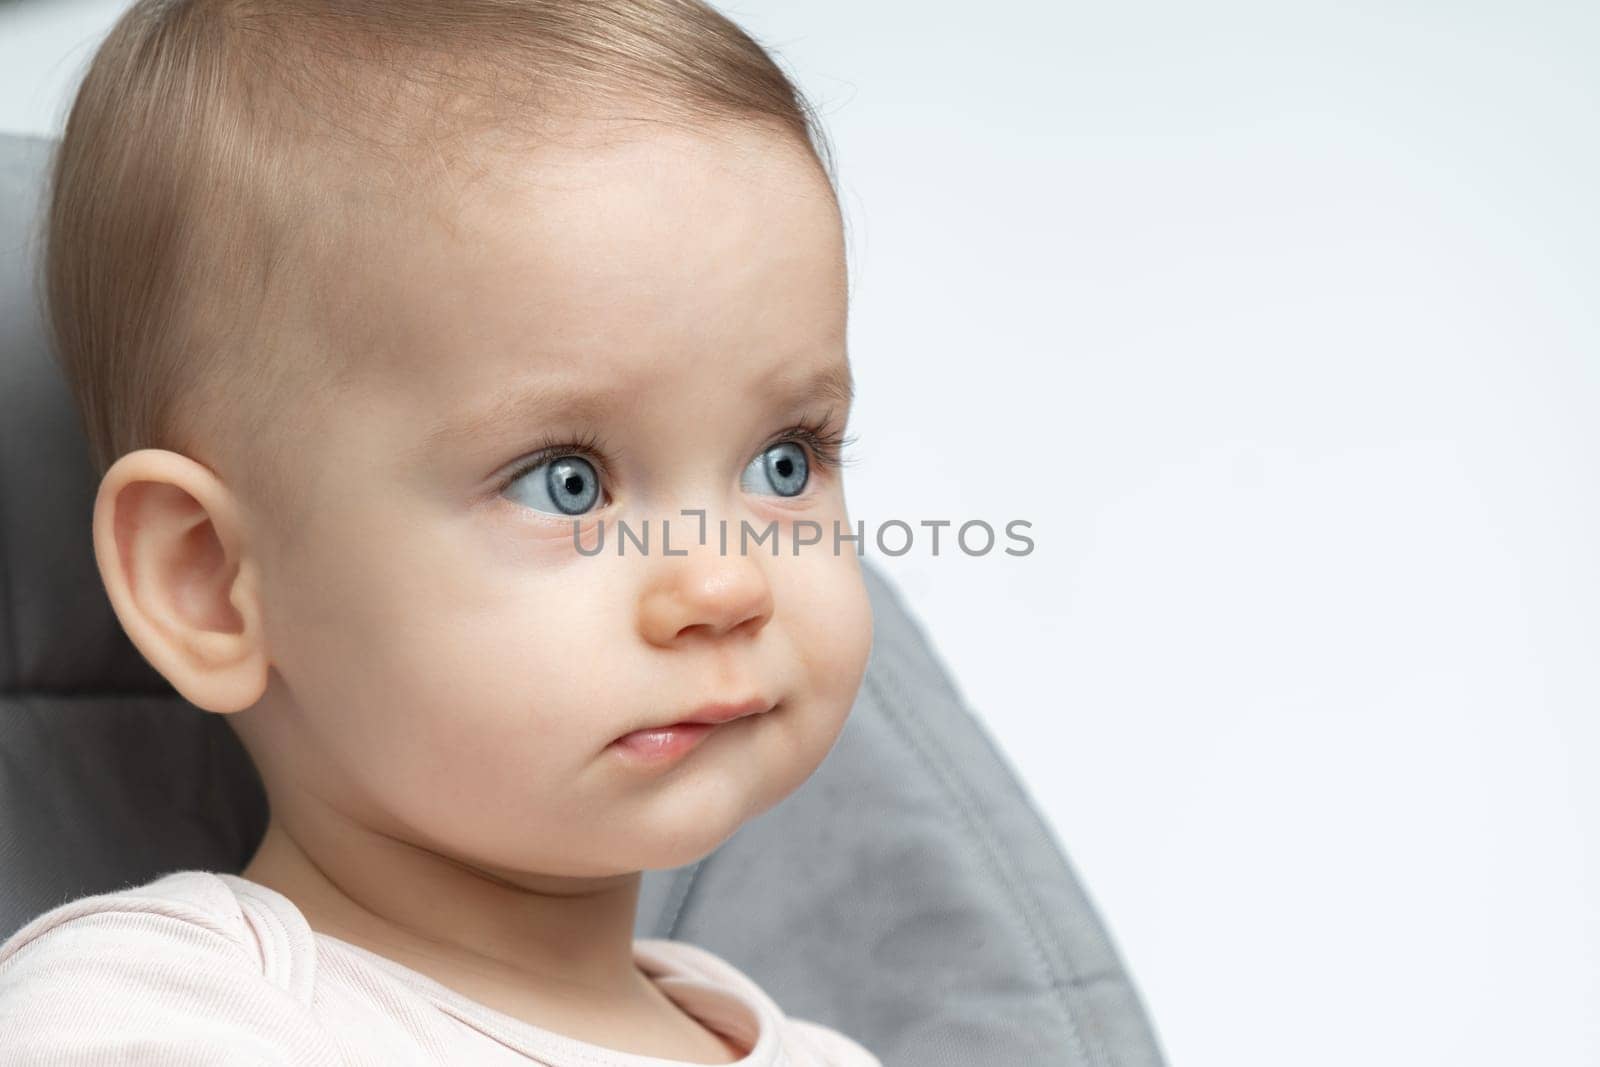 Baby's thoughtful expression caught in a close-up. Concept of early contemplation and the depth of young minds by Mariakray